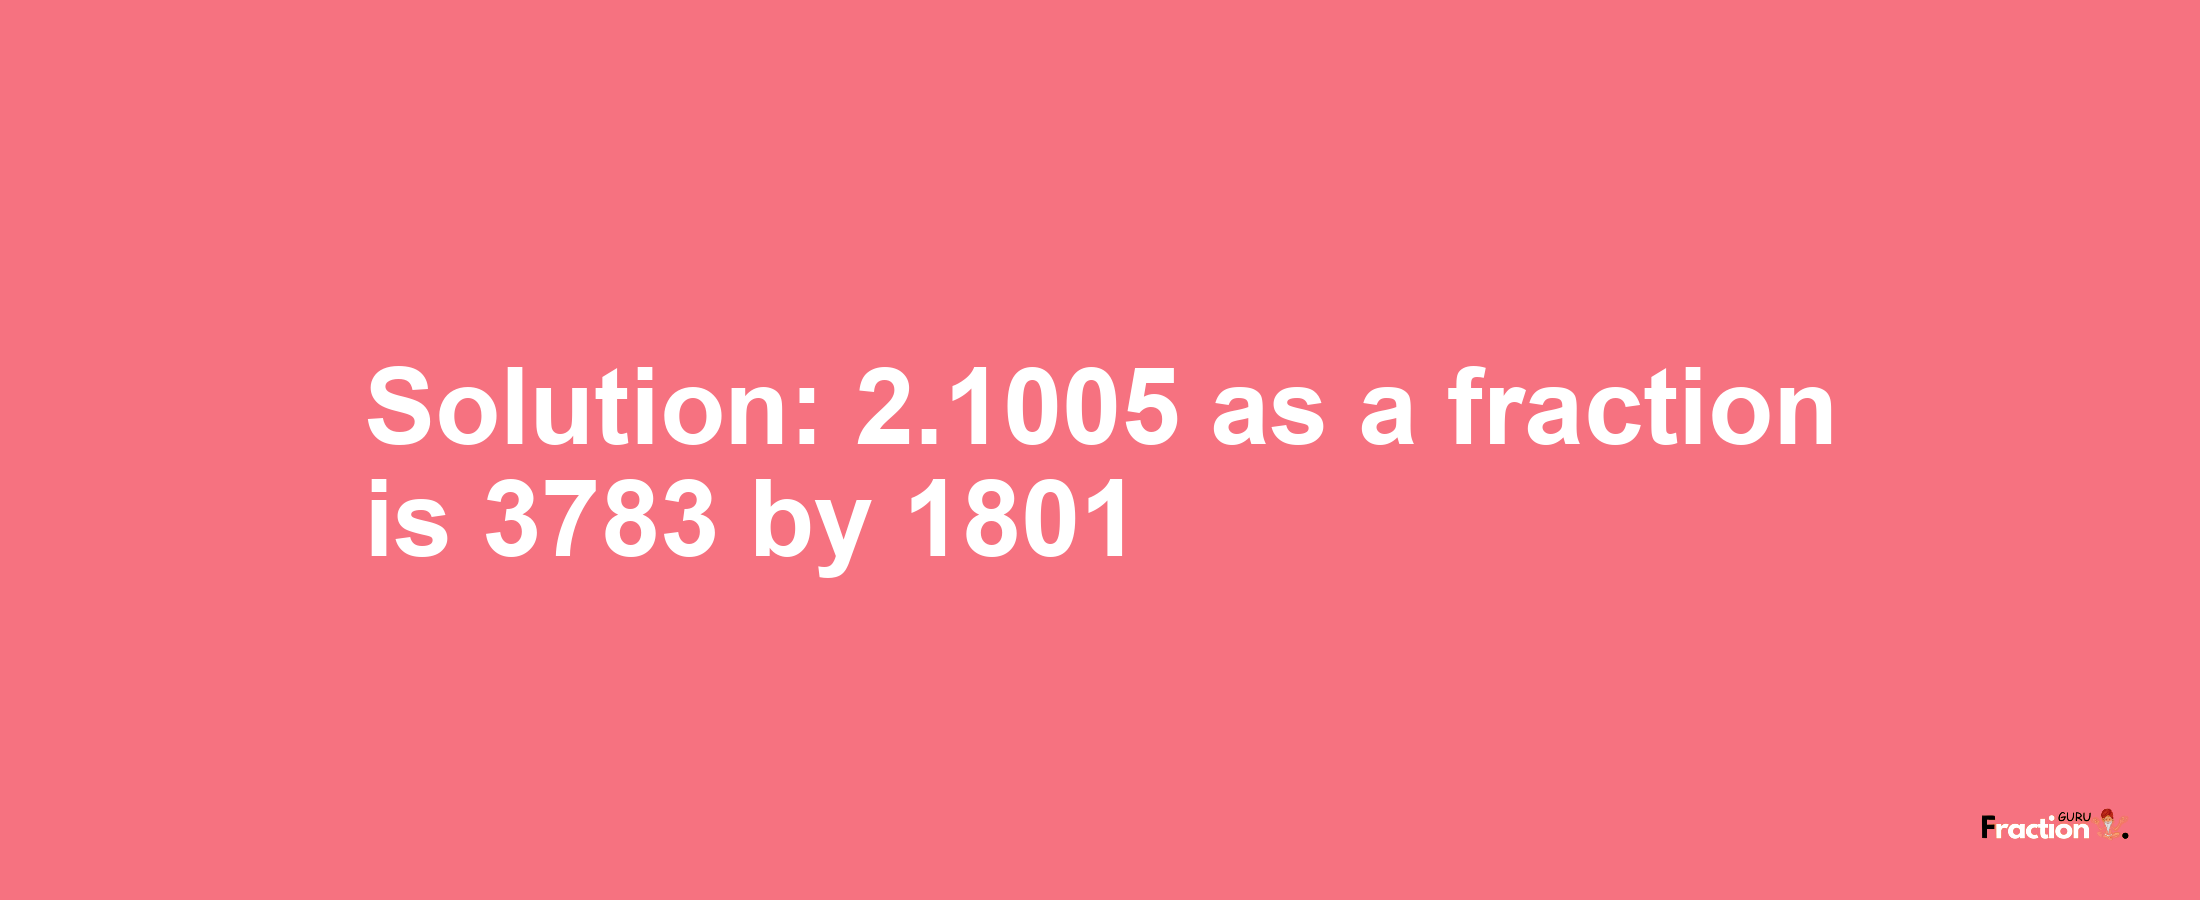 Solution:2.1005 as a fraction is 3783/1801